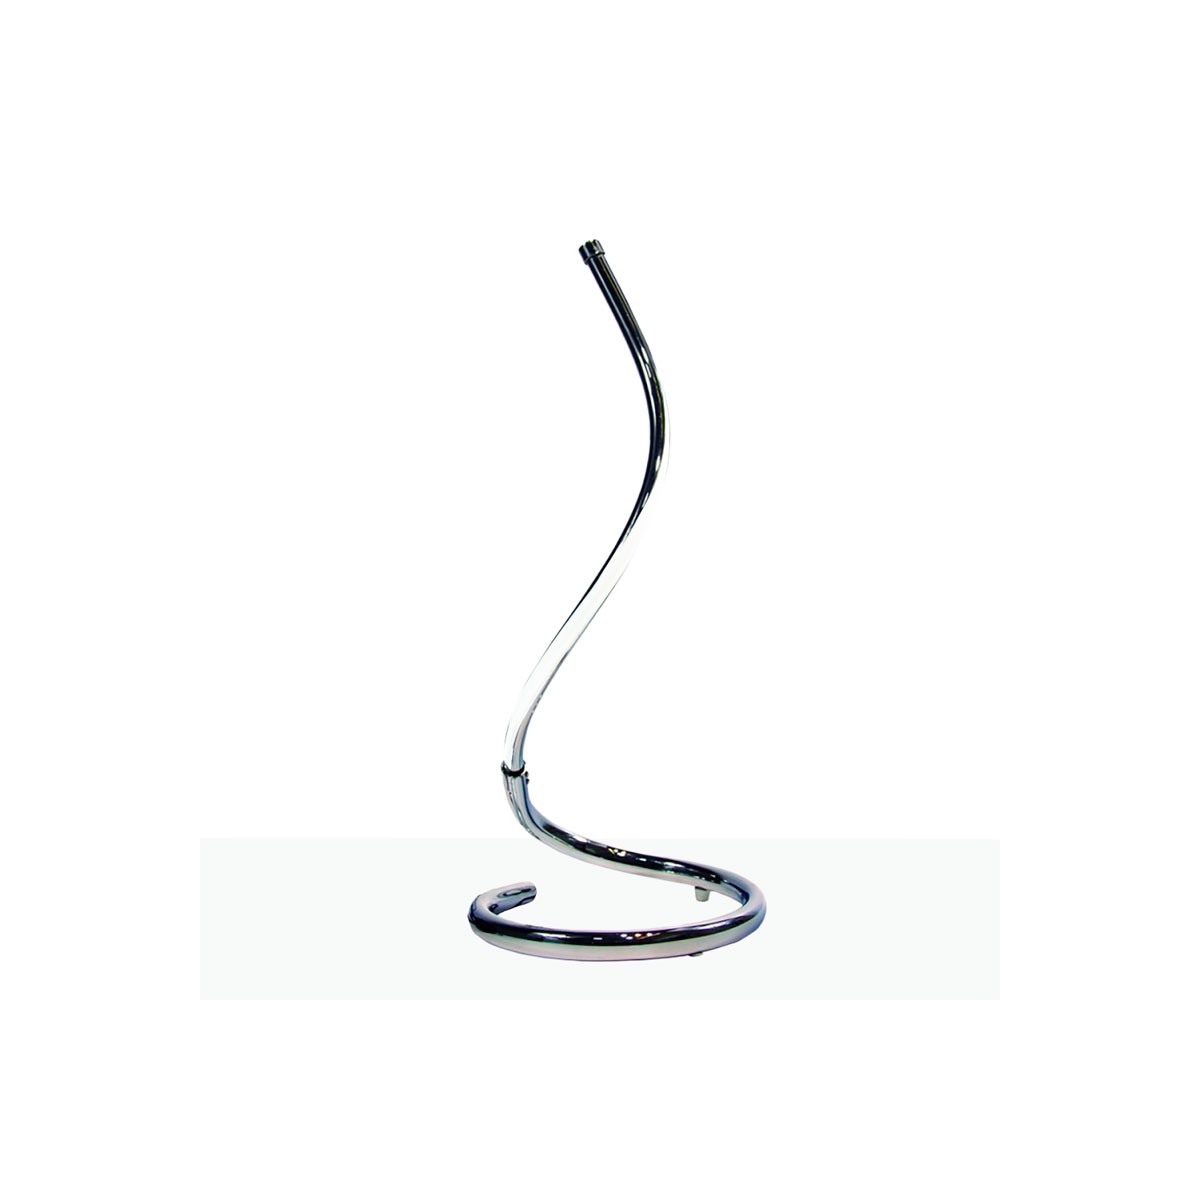 LED table lamp "HELIX-S" 6W